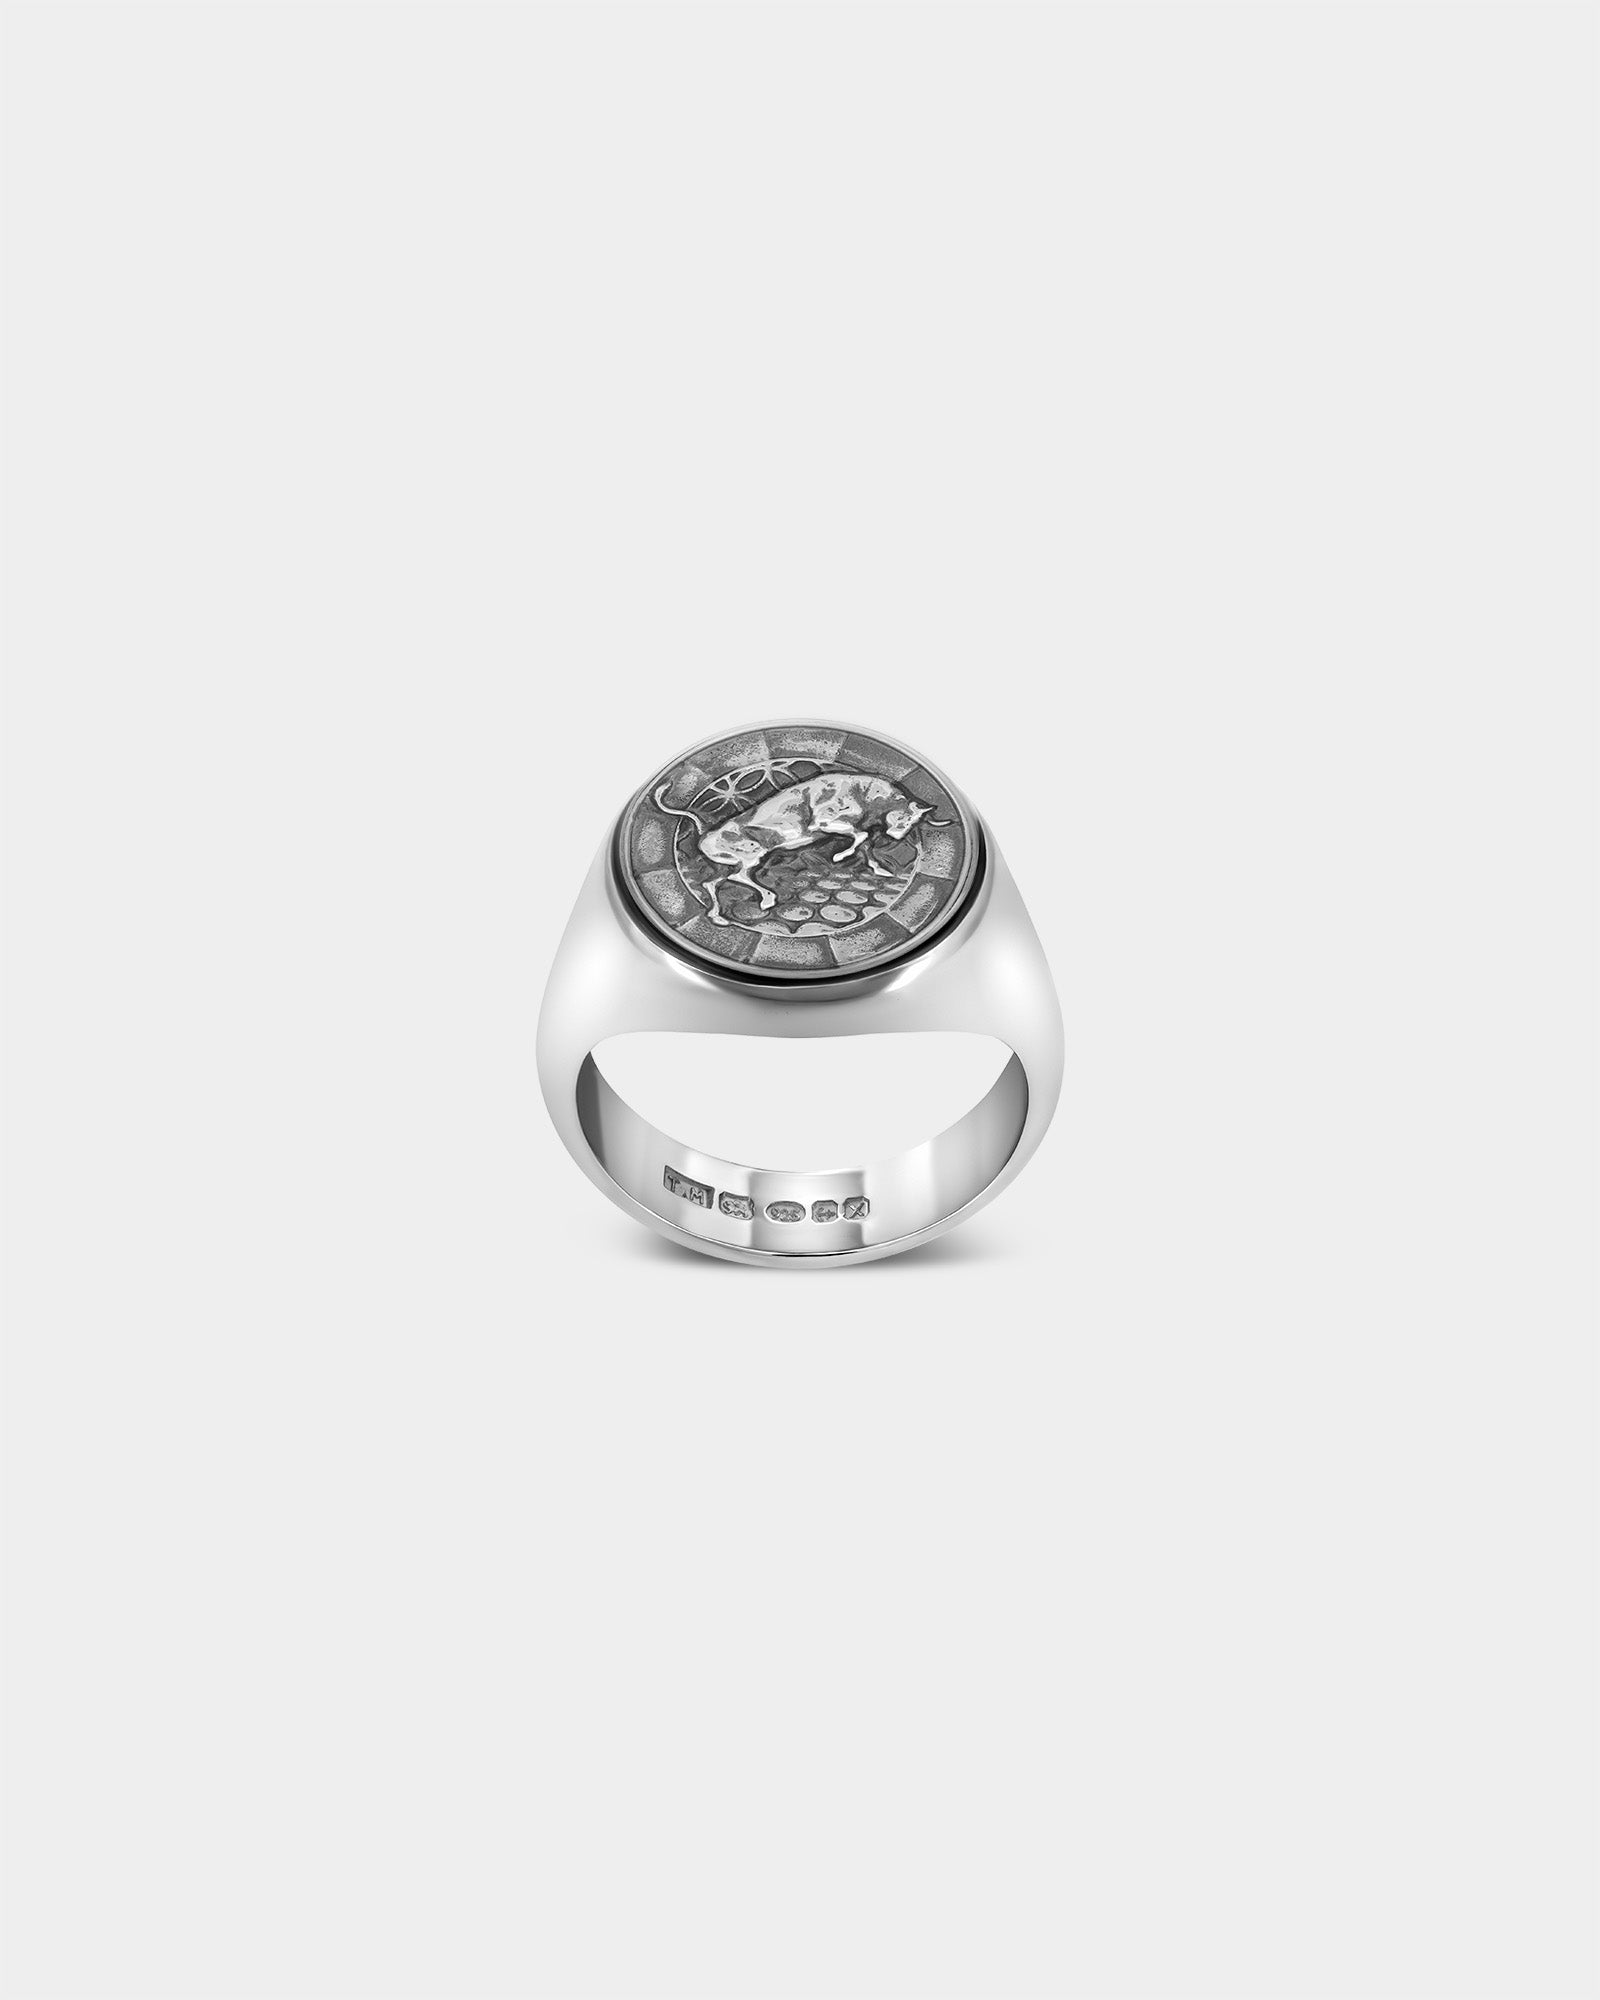 The Bull Large Signet Ring in Sterling Silver by Wilson Grant